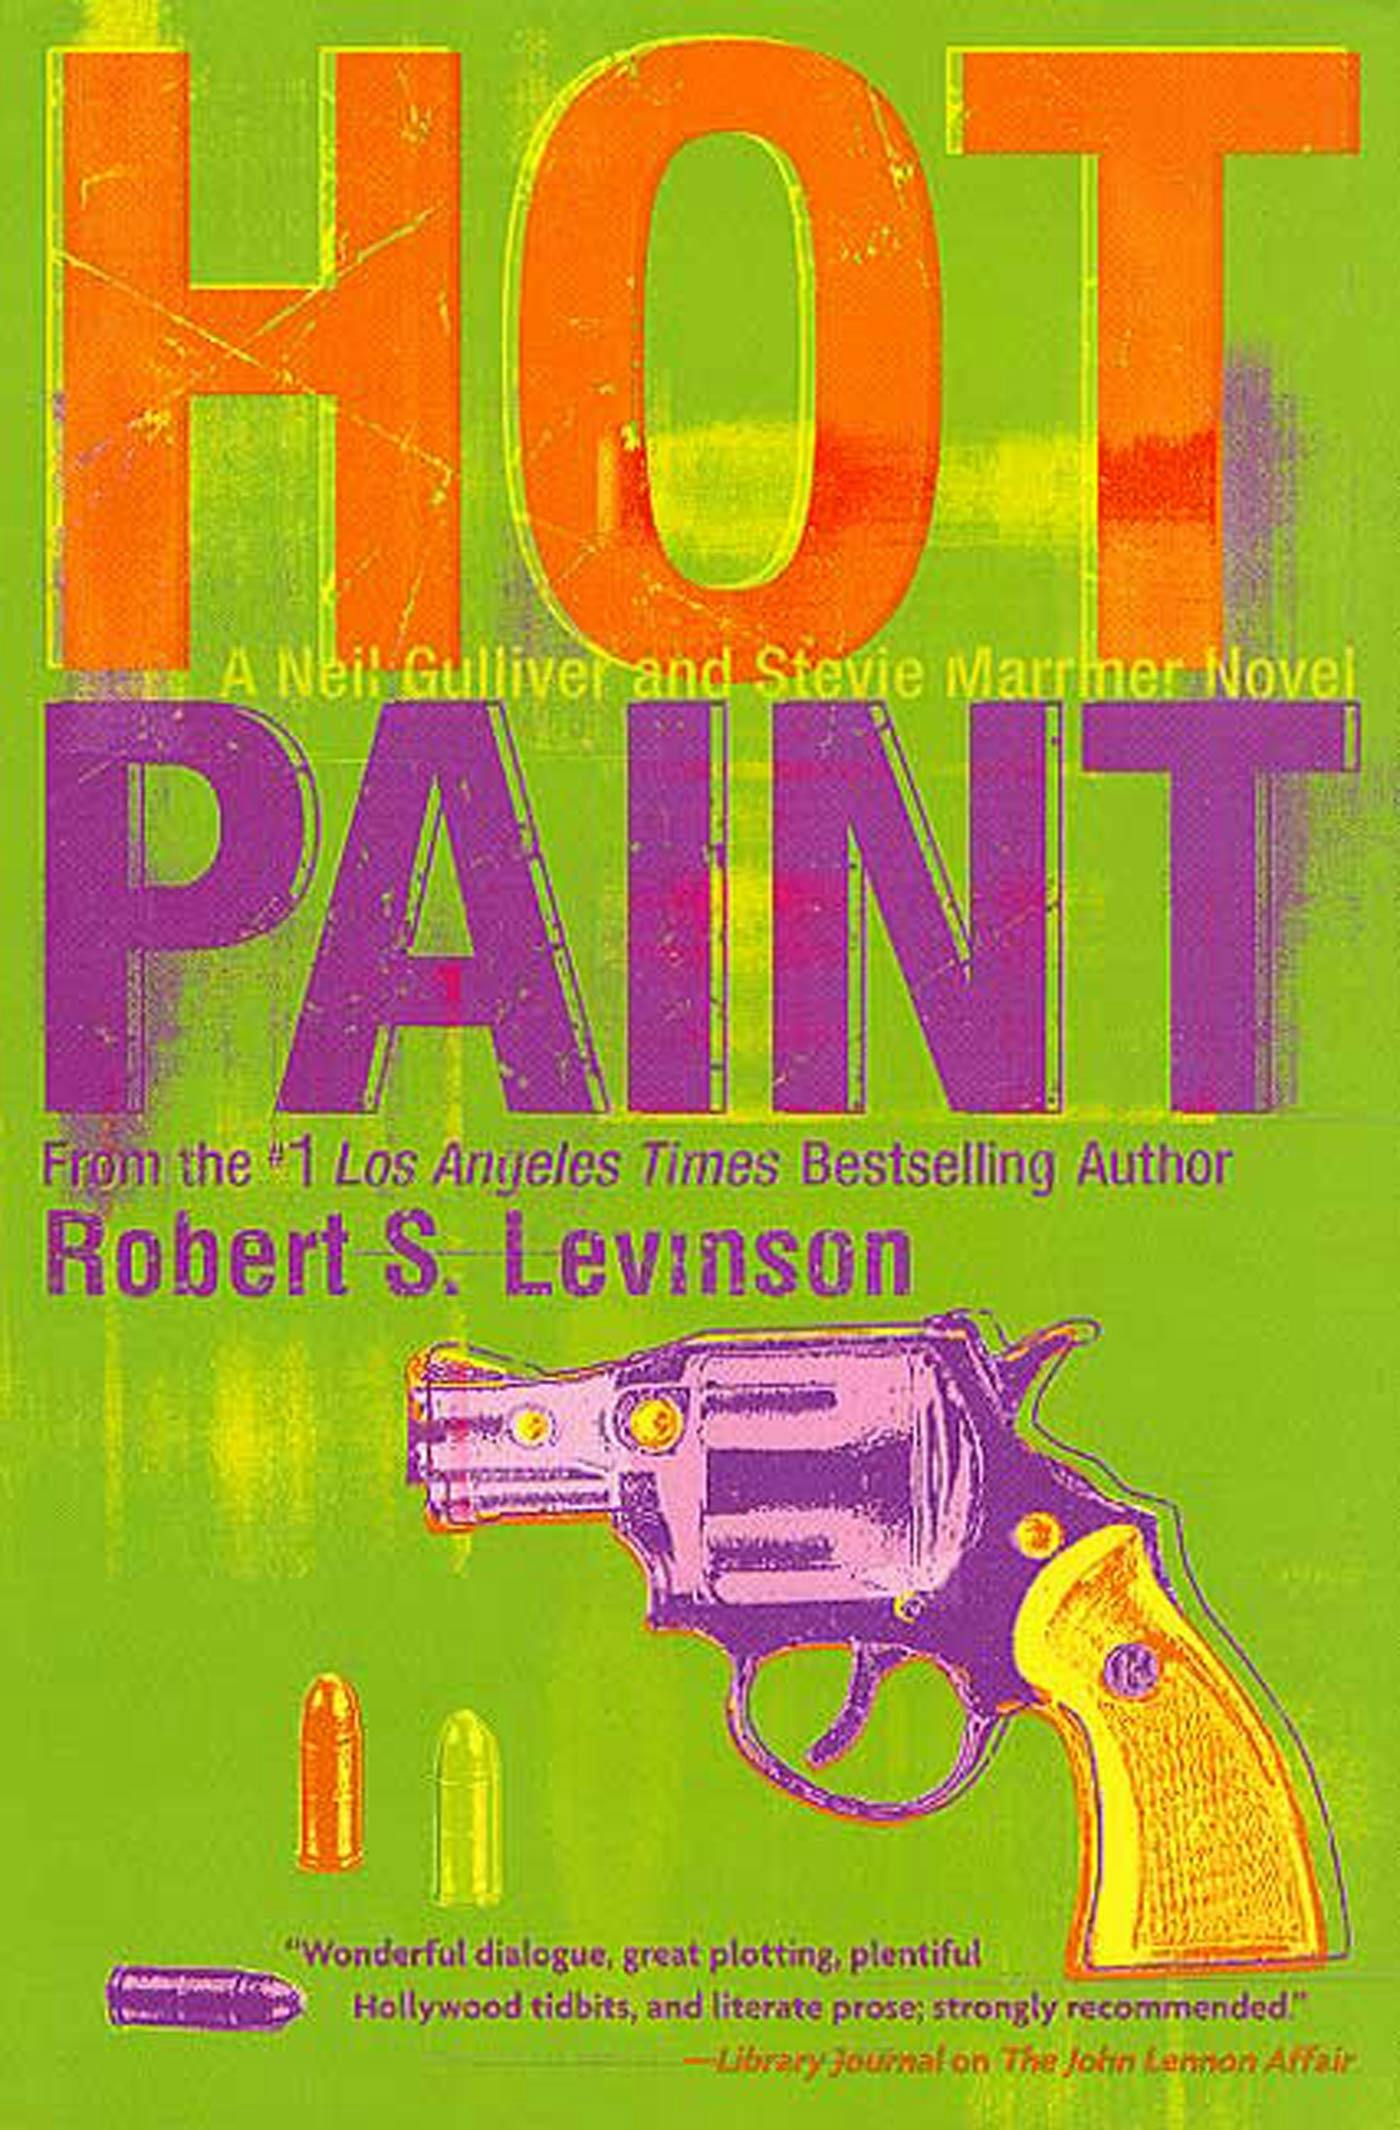 Cover for the book titled as: Hot Paint